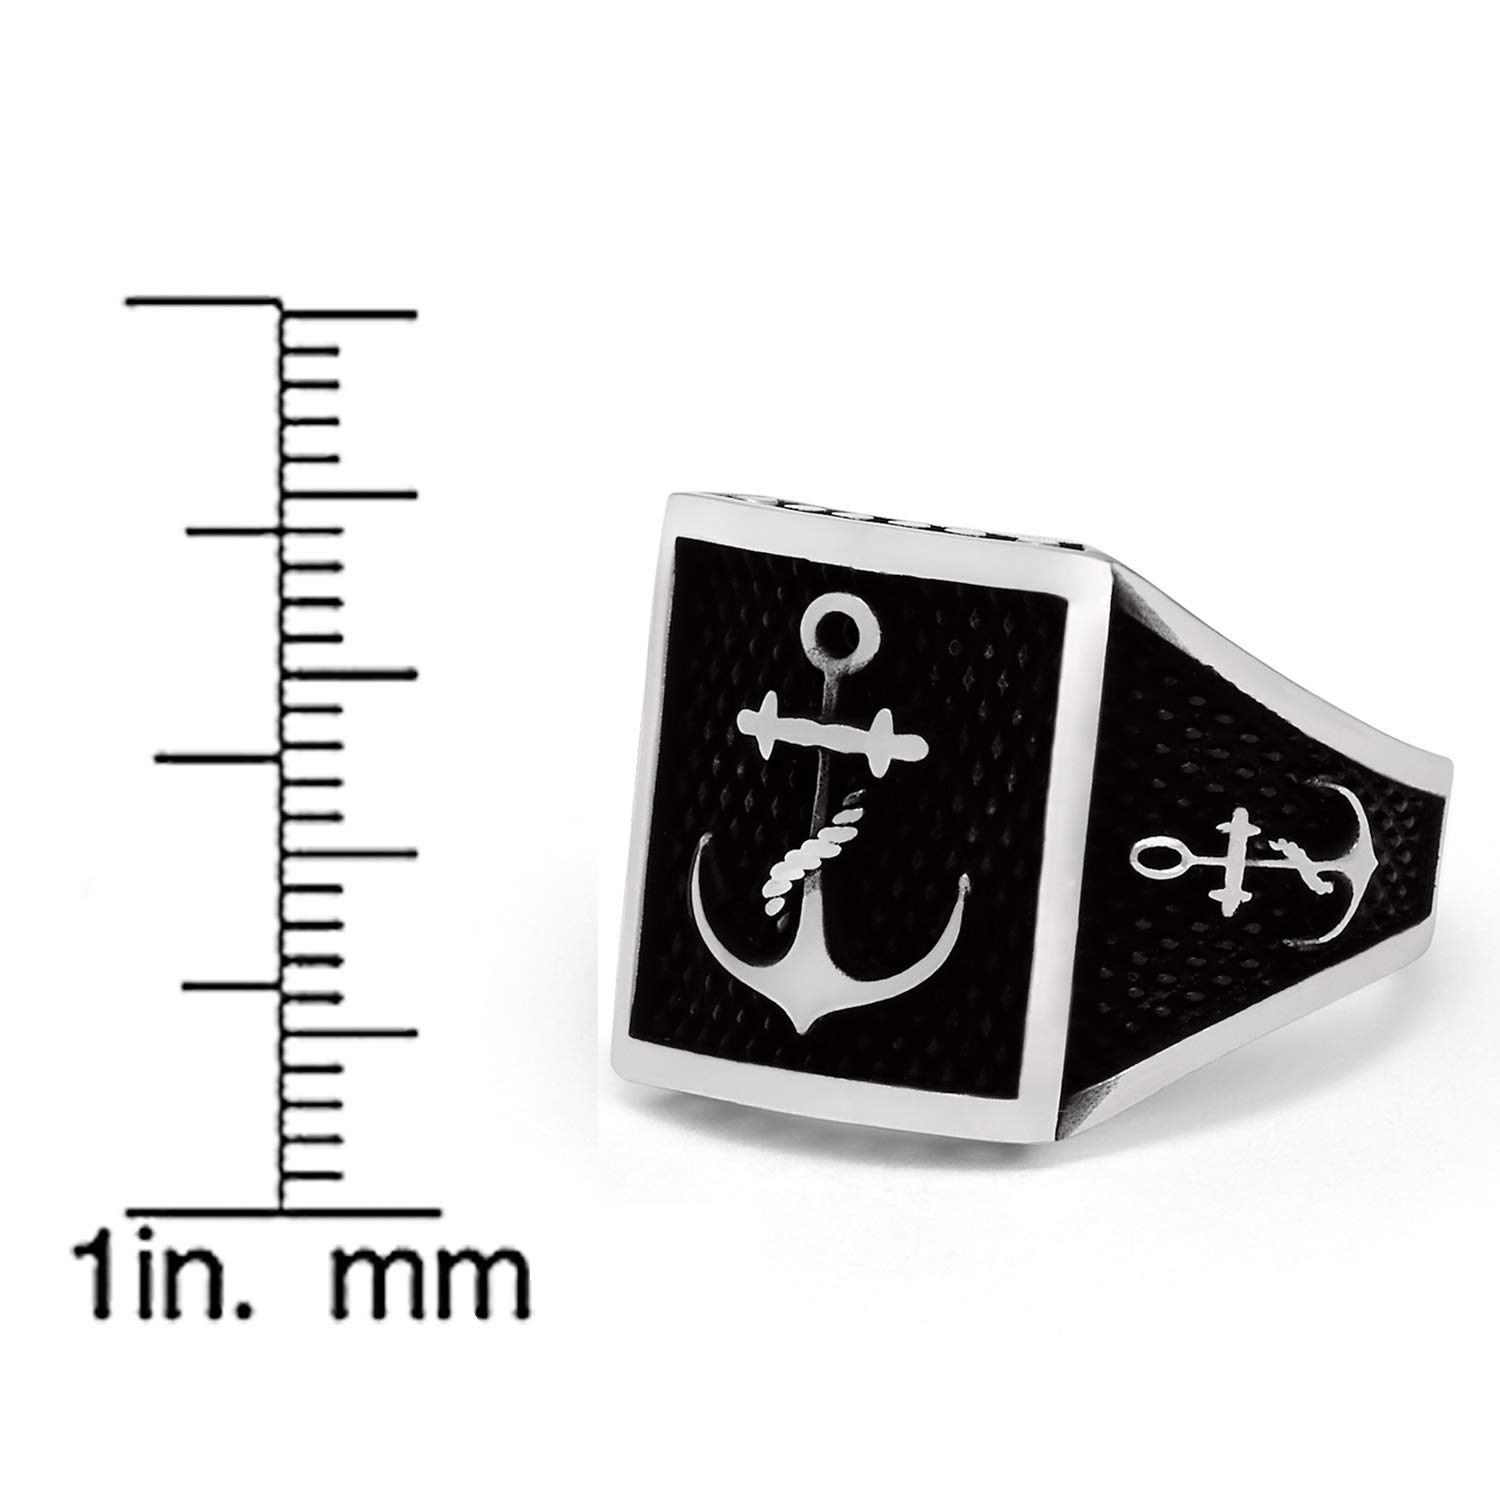 Metal Masters Co. Men's Nautical Anchor Sailing Ring Sterling Silver 925 Black Vintage Signet 16MM